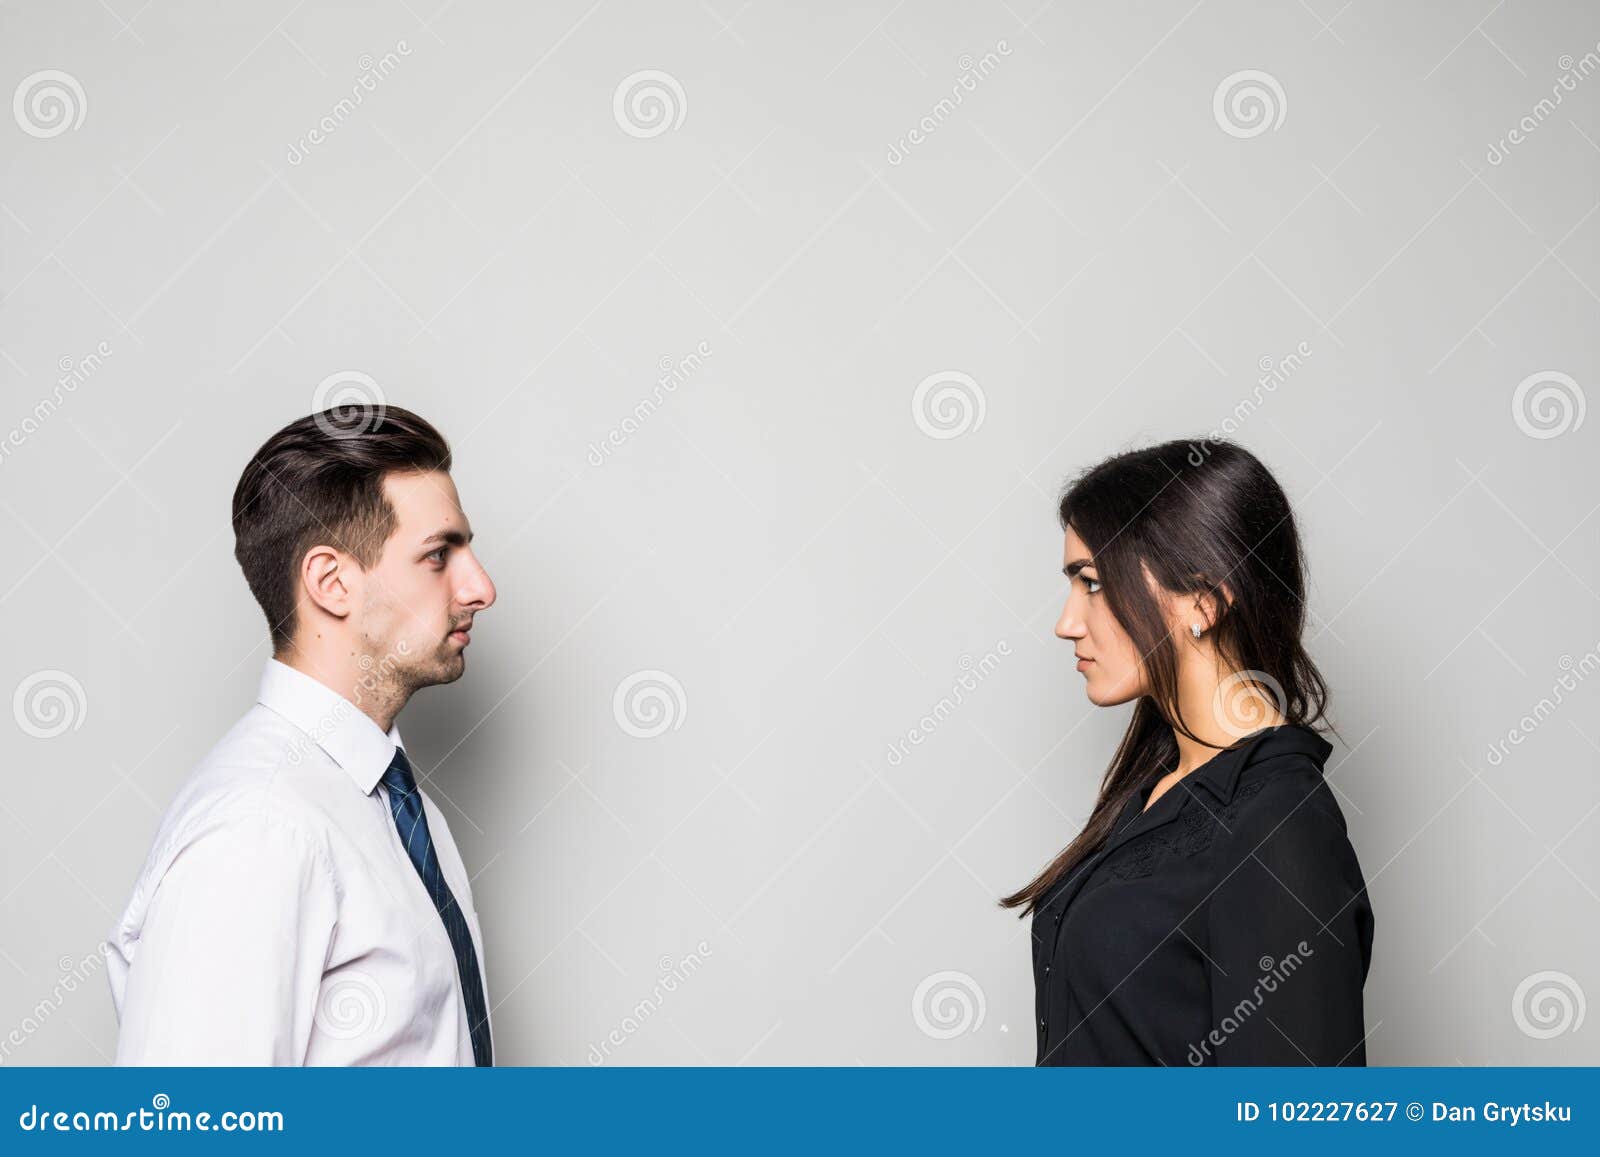 Concept of Confrontation in Business. Close Up Photo of Two Young ...